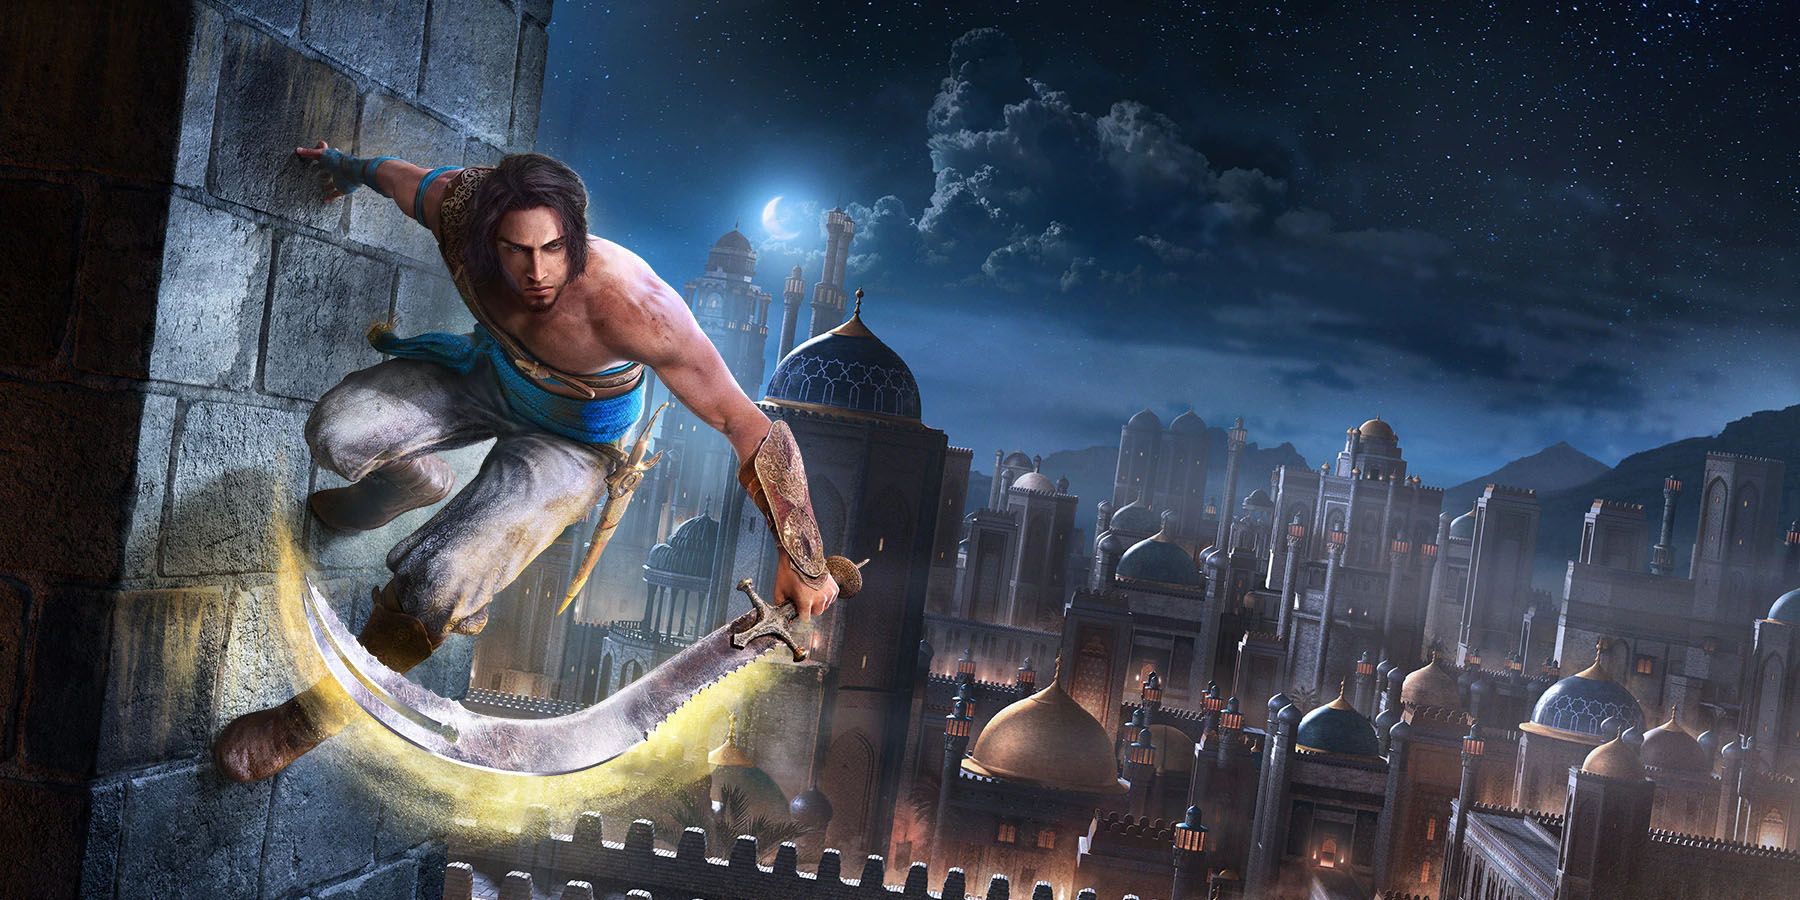 A promotional image of the Prince of Persia scalling a wall in front of a city at night.